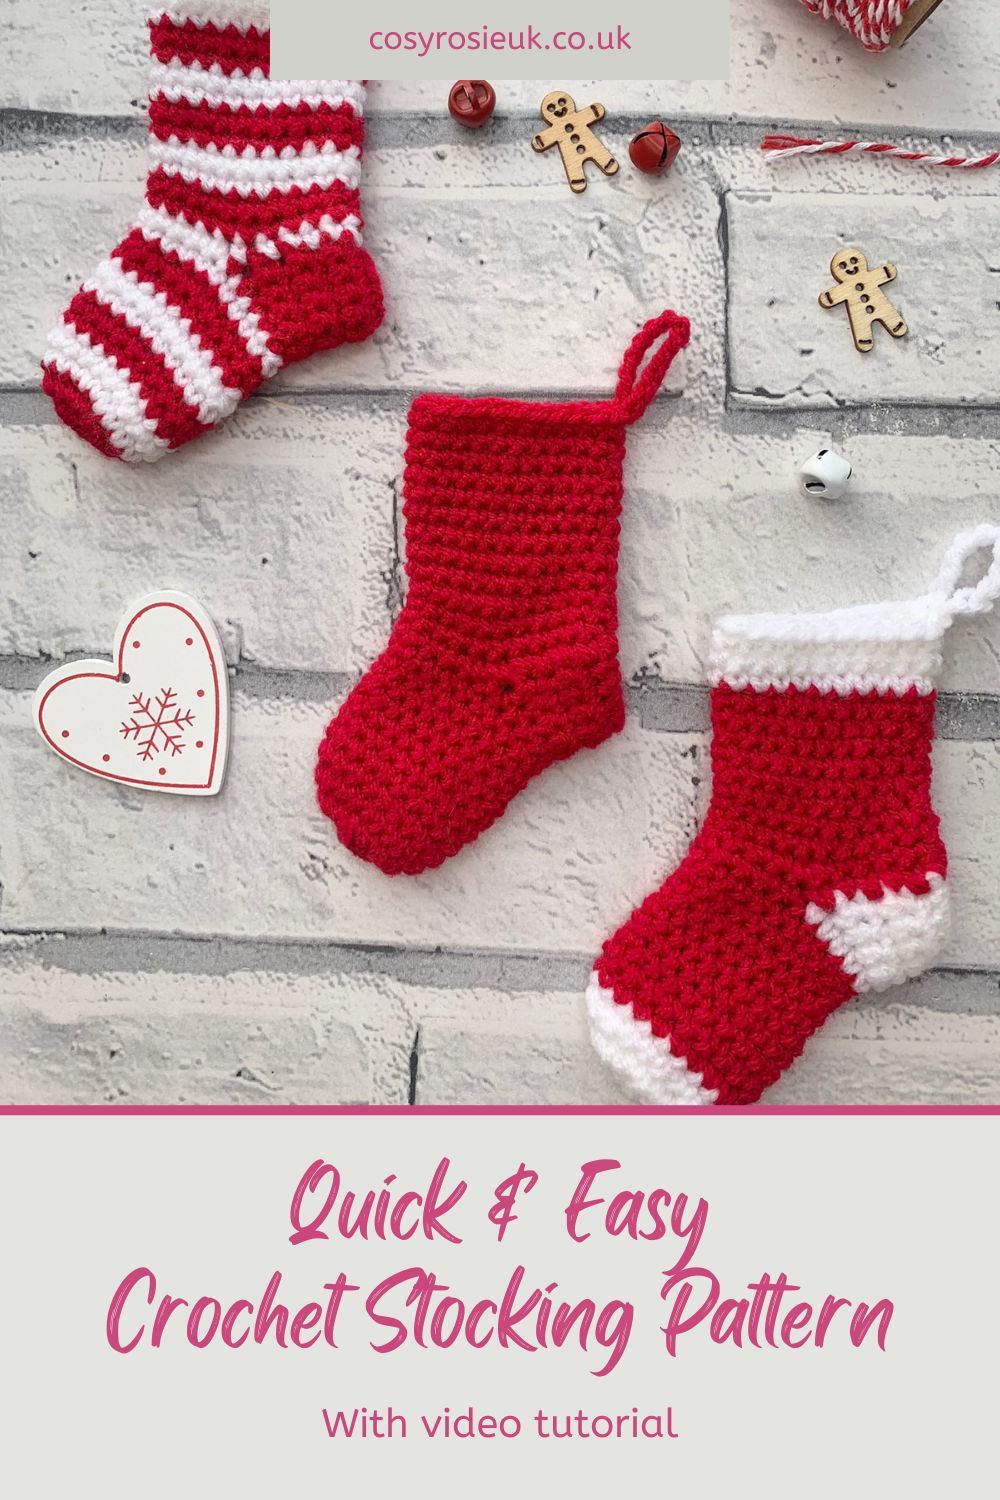 Single Crochet Quick and easy Crochet stocking pattern